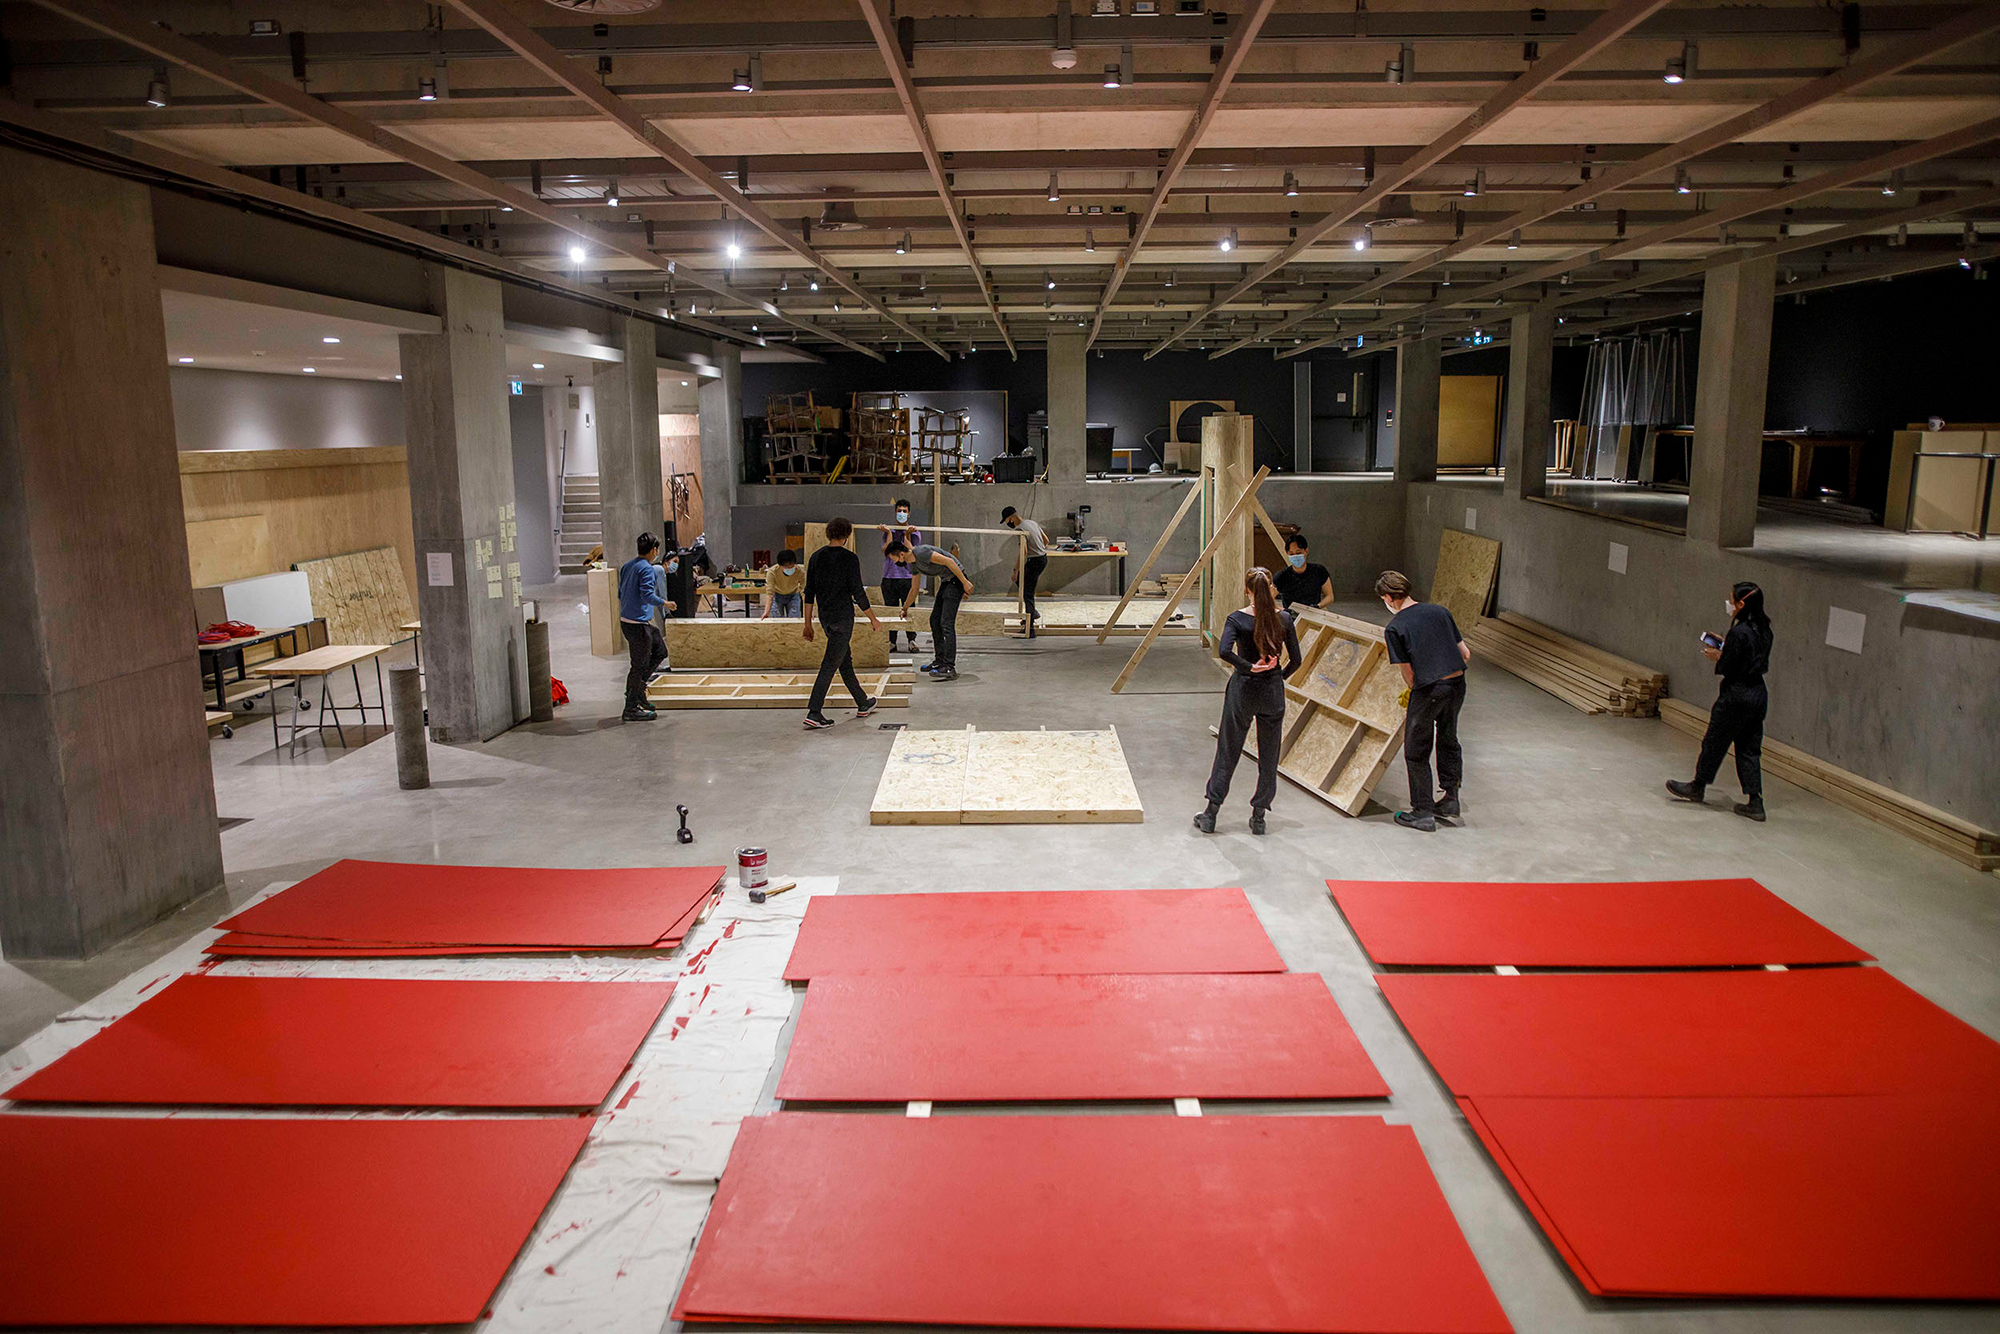 Daniels architecture students are working on building a station in the background; nine large red panels are laid out on the floor in the foreground